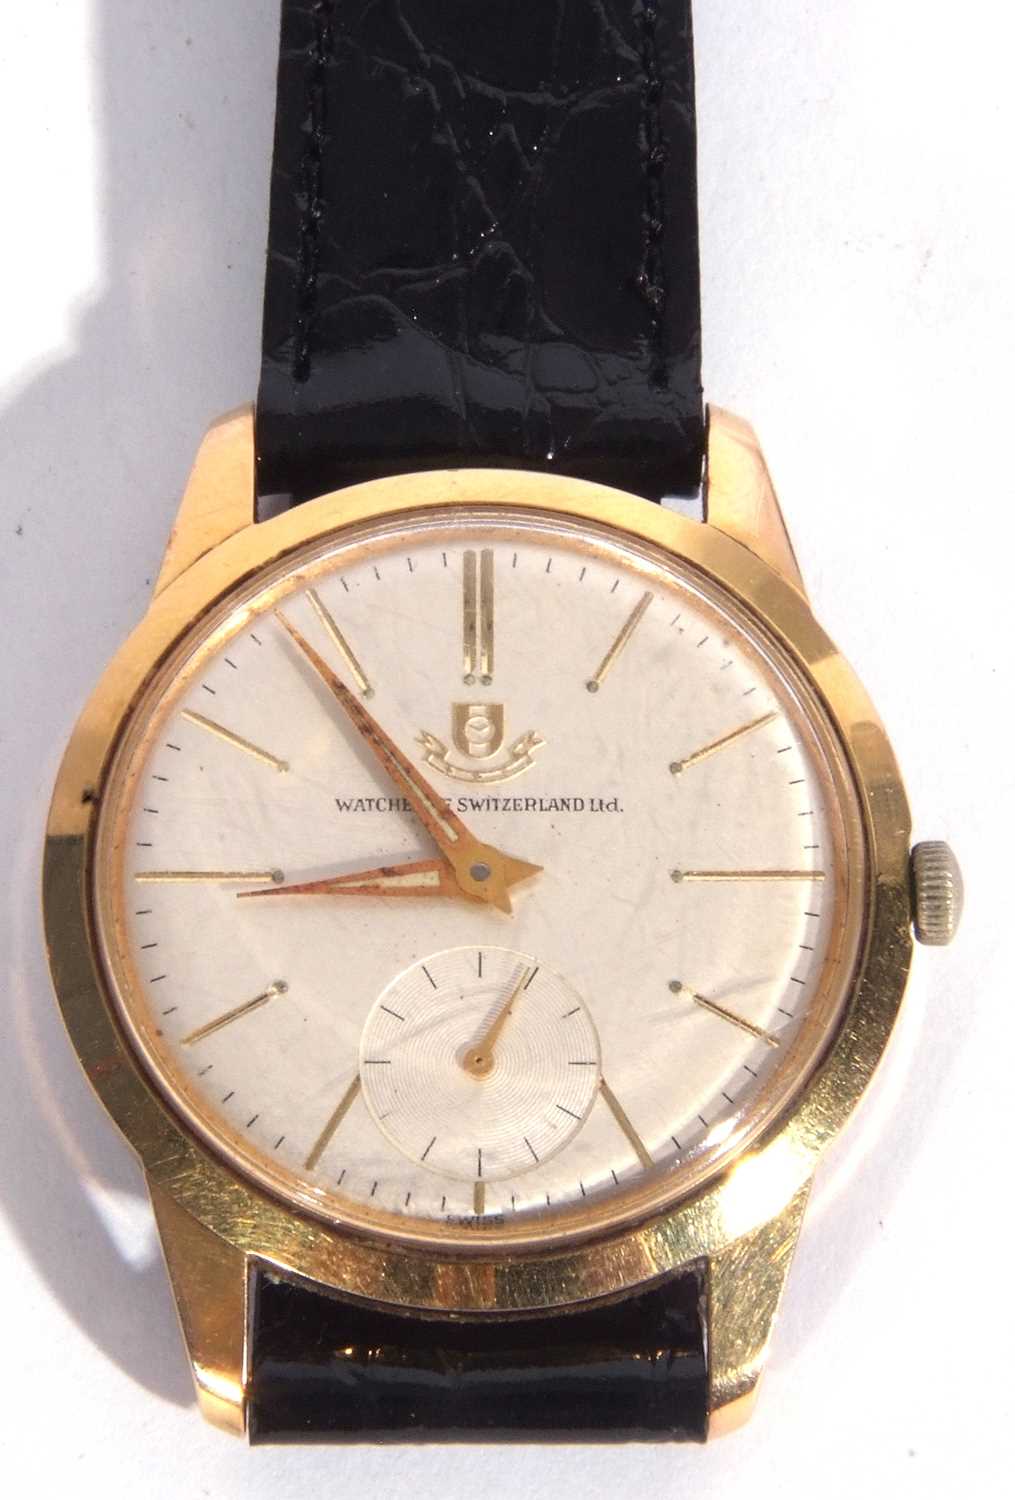 Watches of Switzerland yellow metal gents watch, with a white dial with subsidiary second dial, - Image 2 of 5